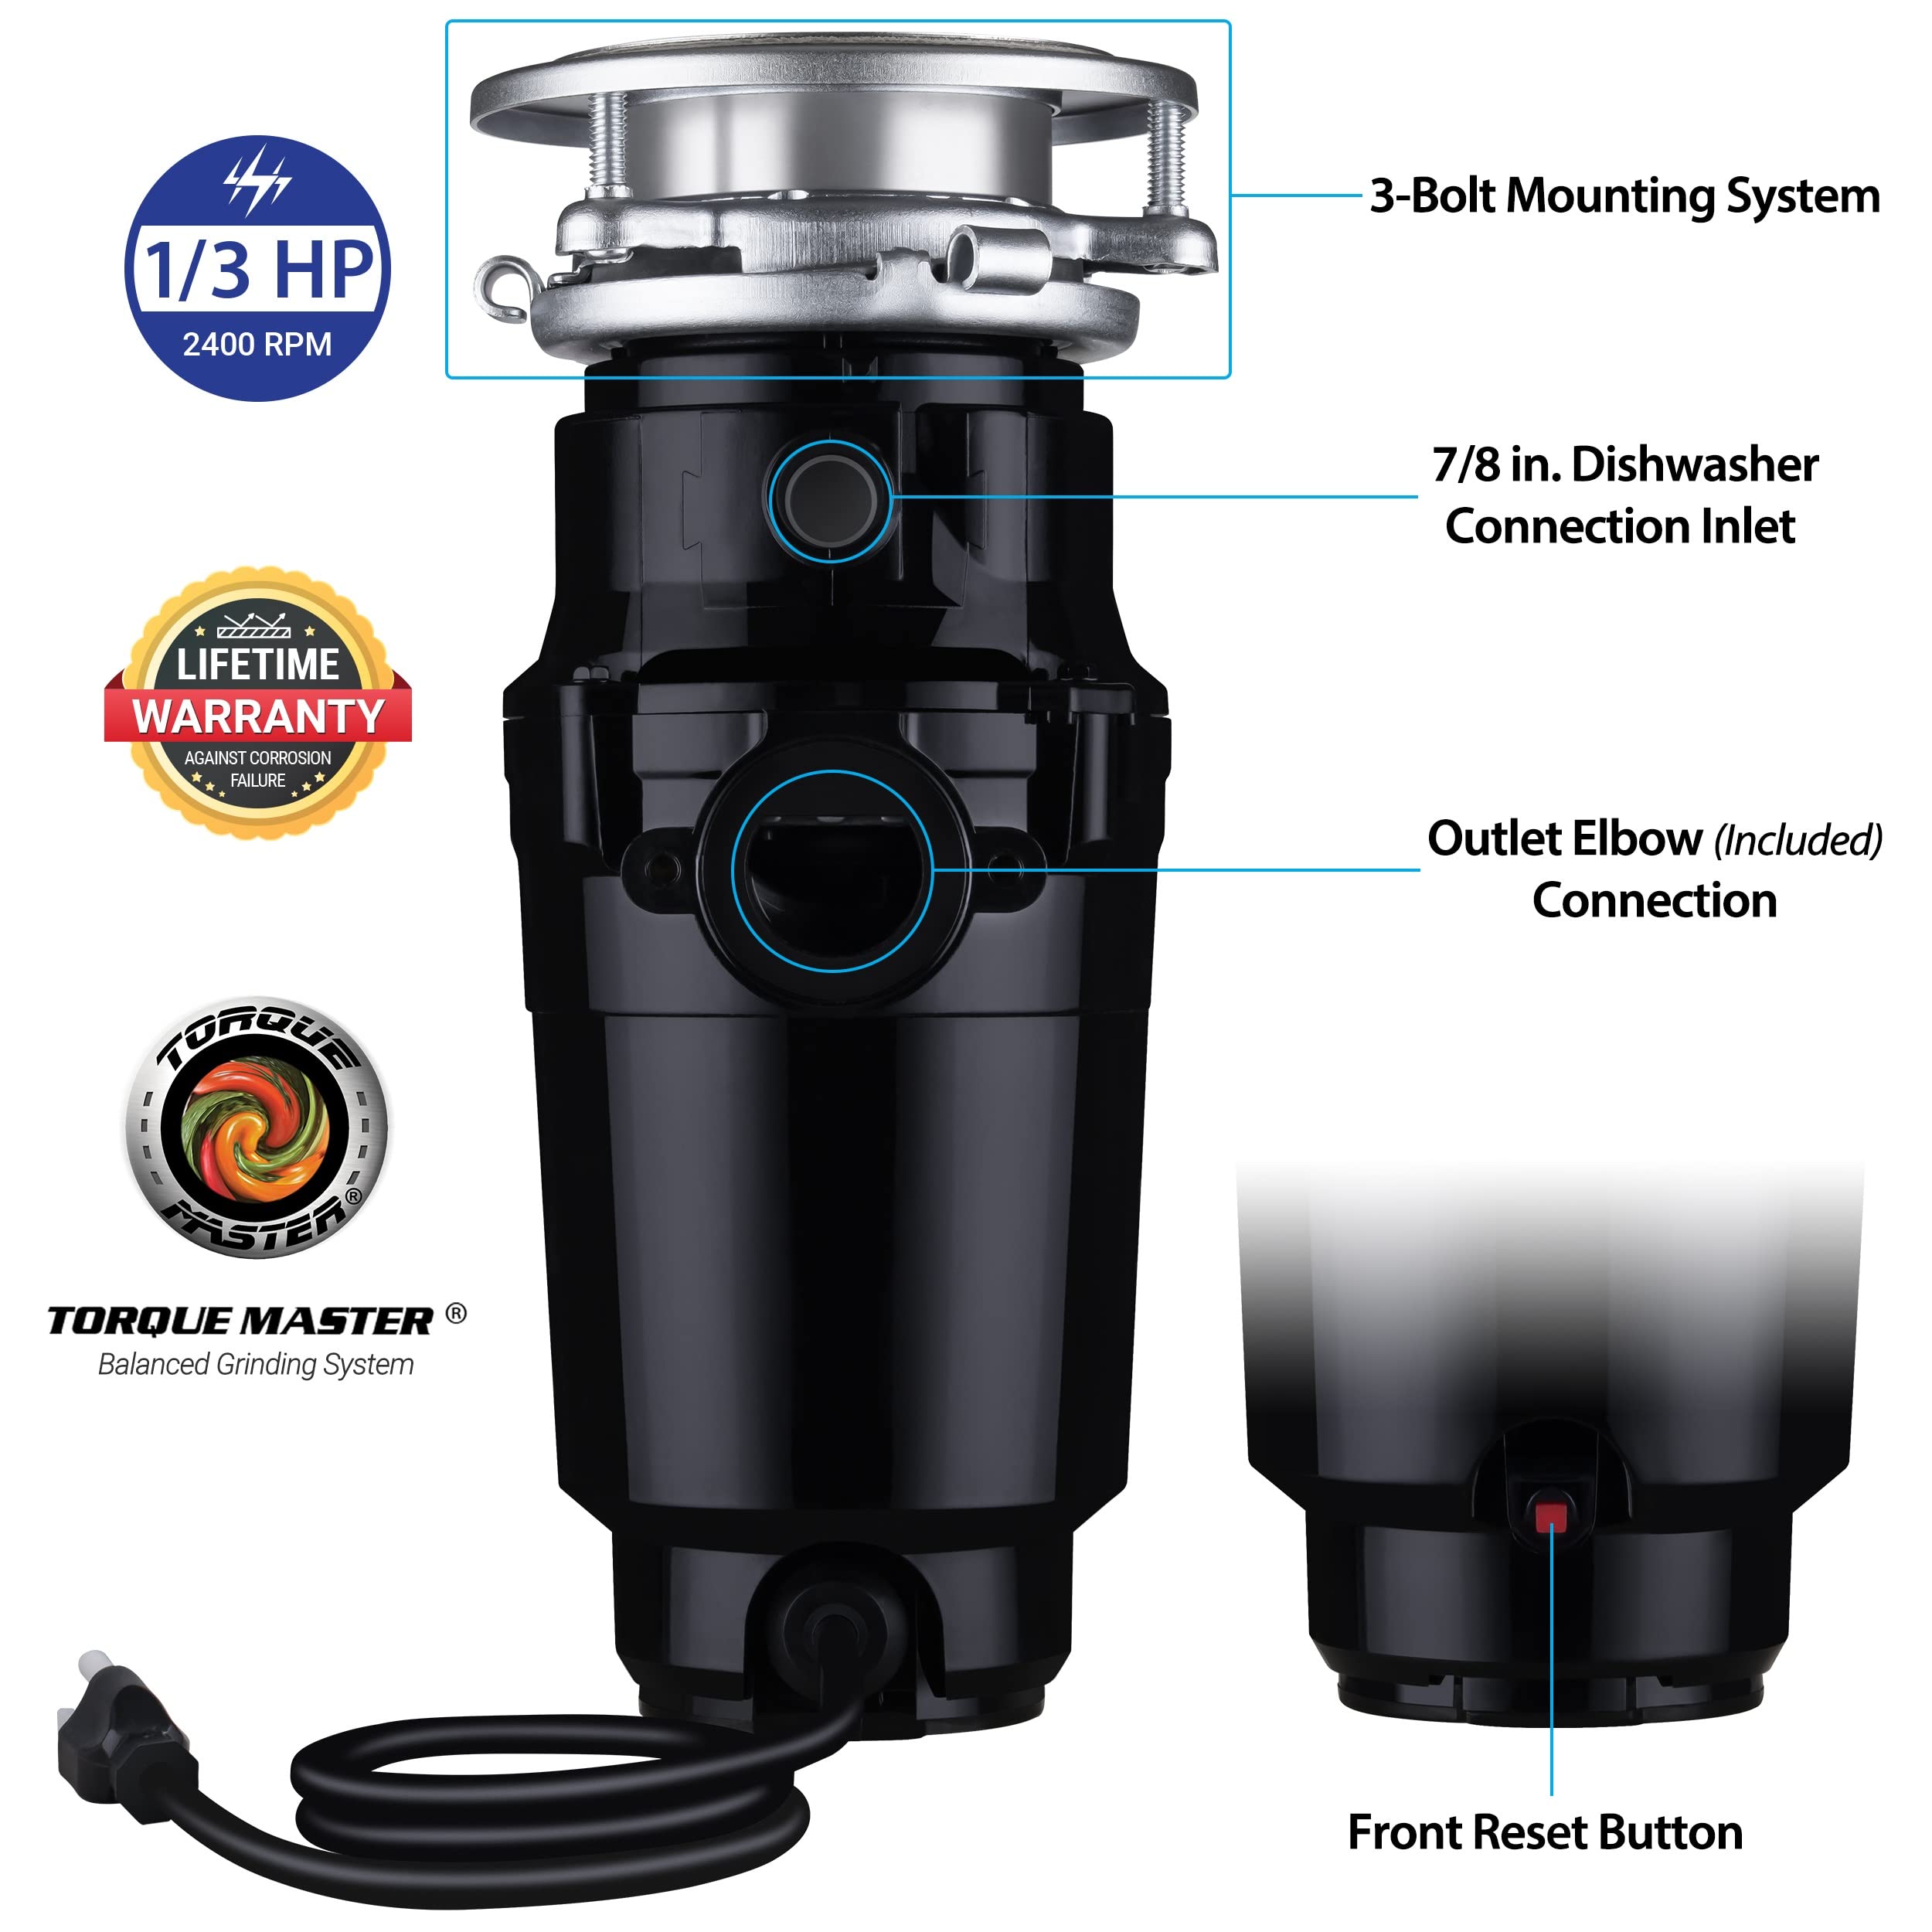 Eco Logic 10-US-EL-4-3B 1/3 Horsepower Garbage Disposal with Removeable Splash Guard, Attached Power Cord and Standard 3-Bolt Mounting System, Continuous Feed, Black